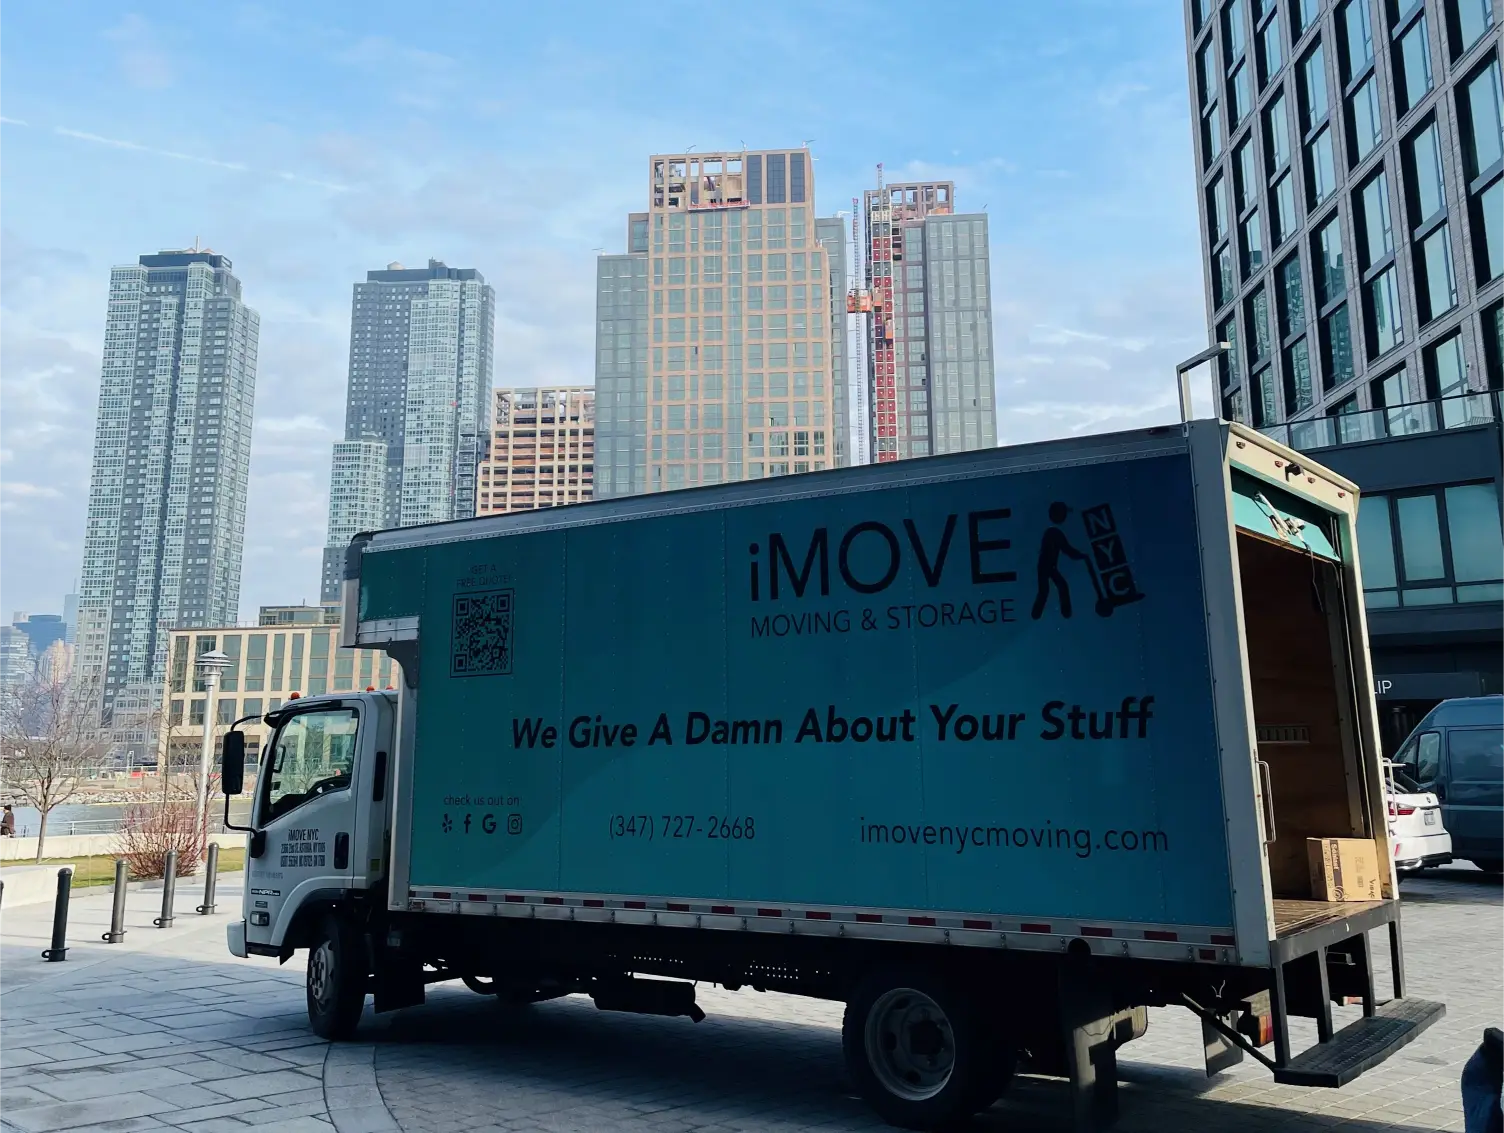 iMOVE NYC Truck During the Office Decluttering Service